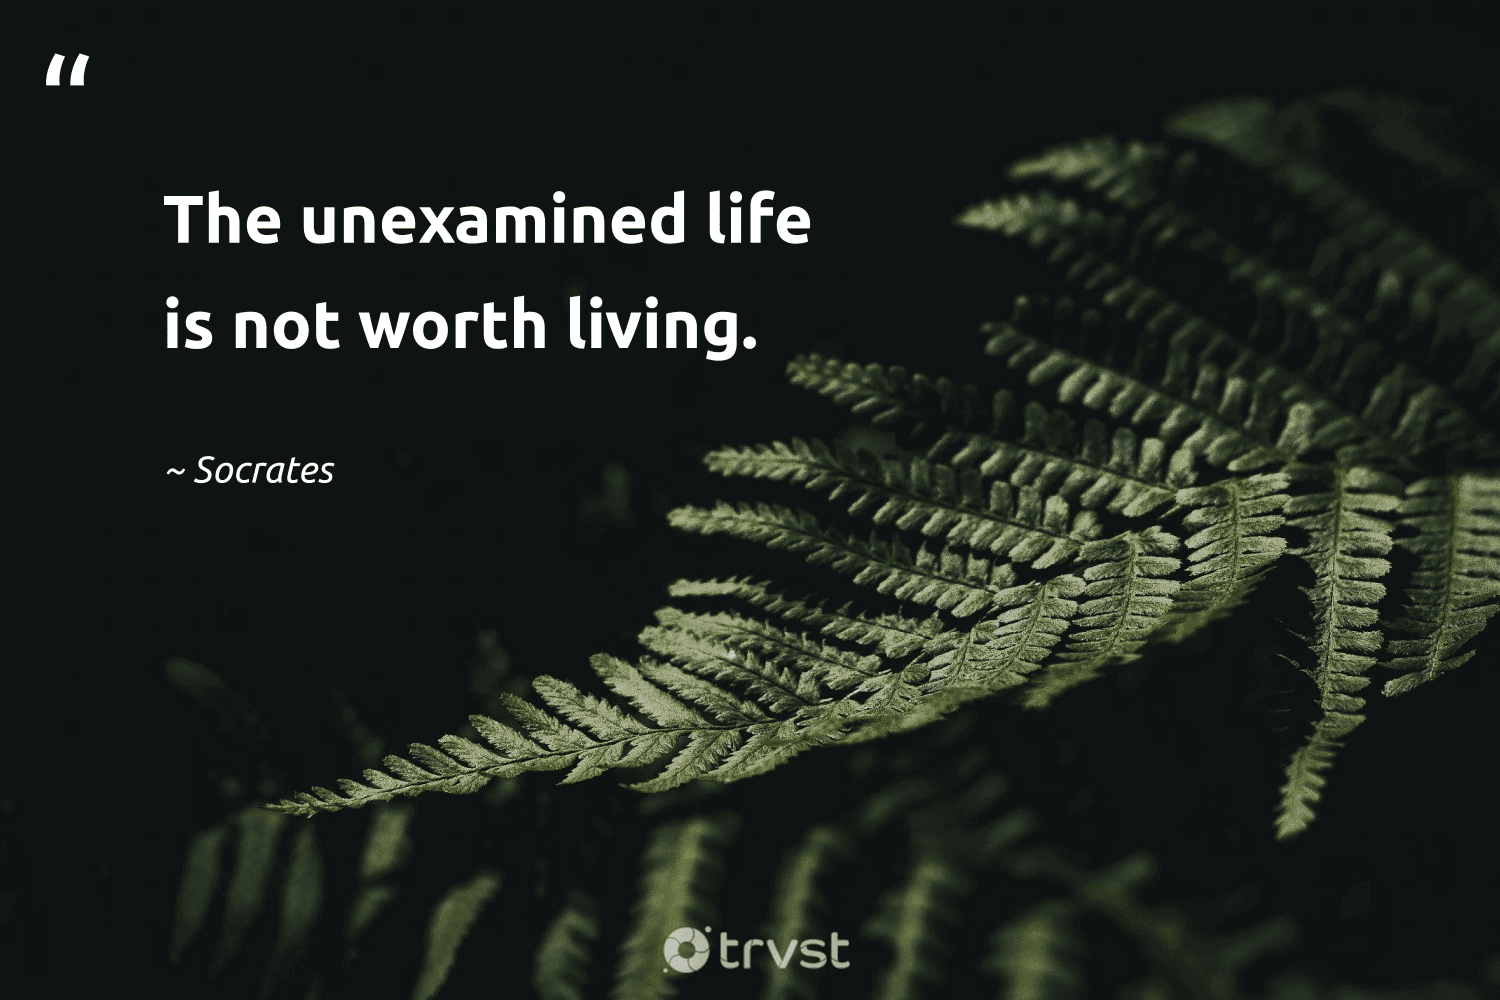 an unexamined life is not worth living reflection